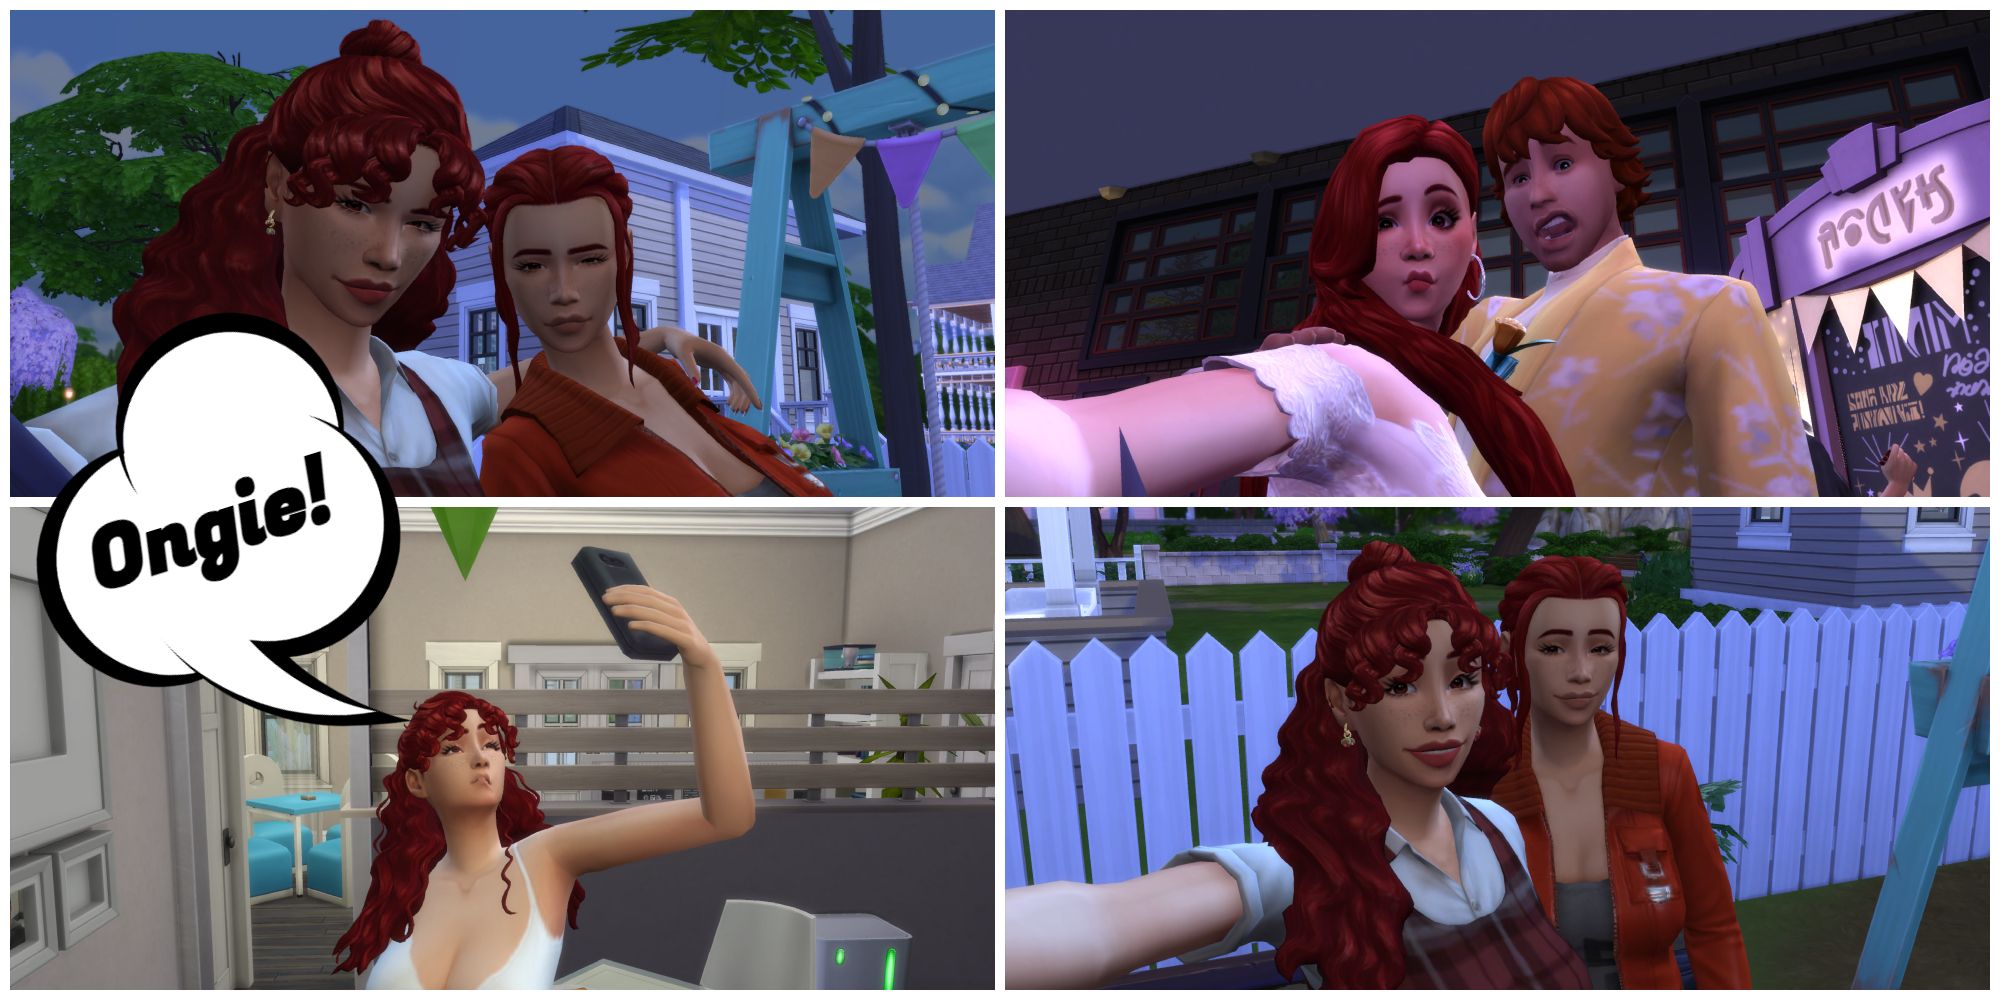 A selfie-obsessed Sim says Ongie in Simlish before taking a selfie